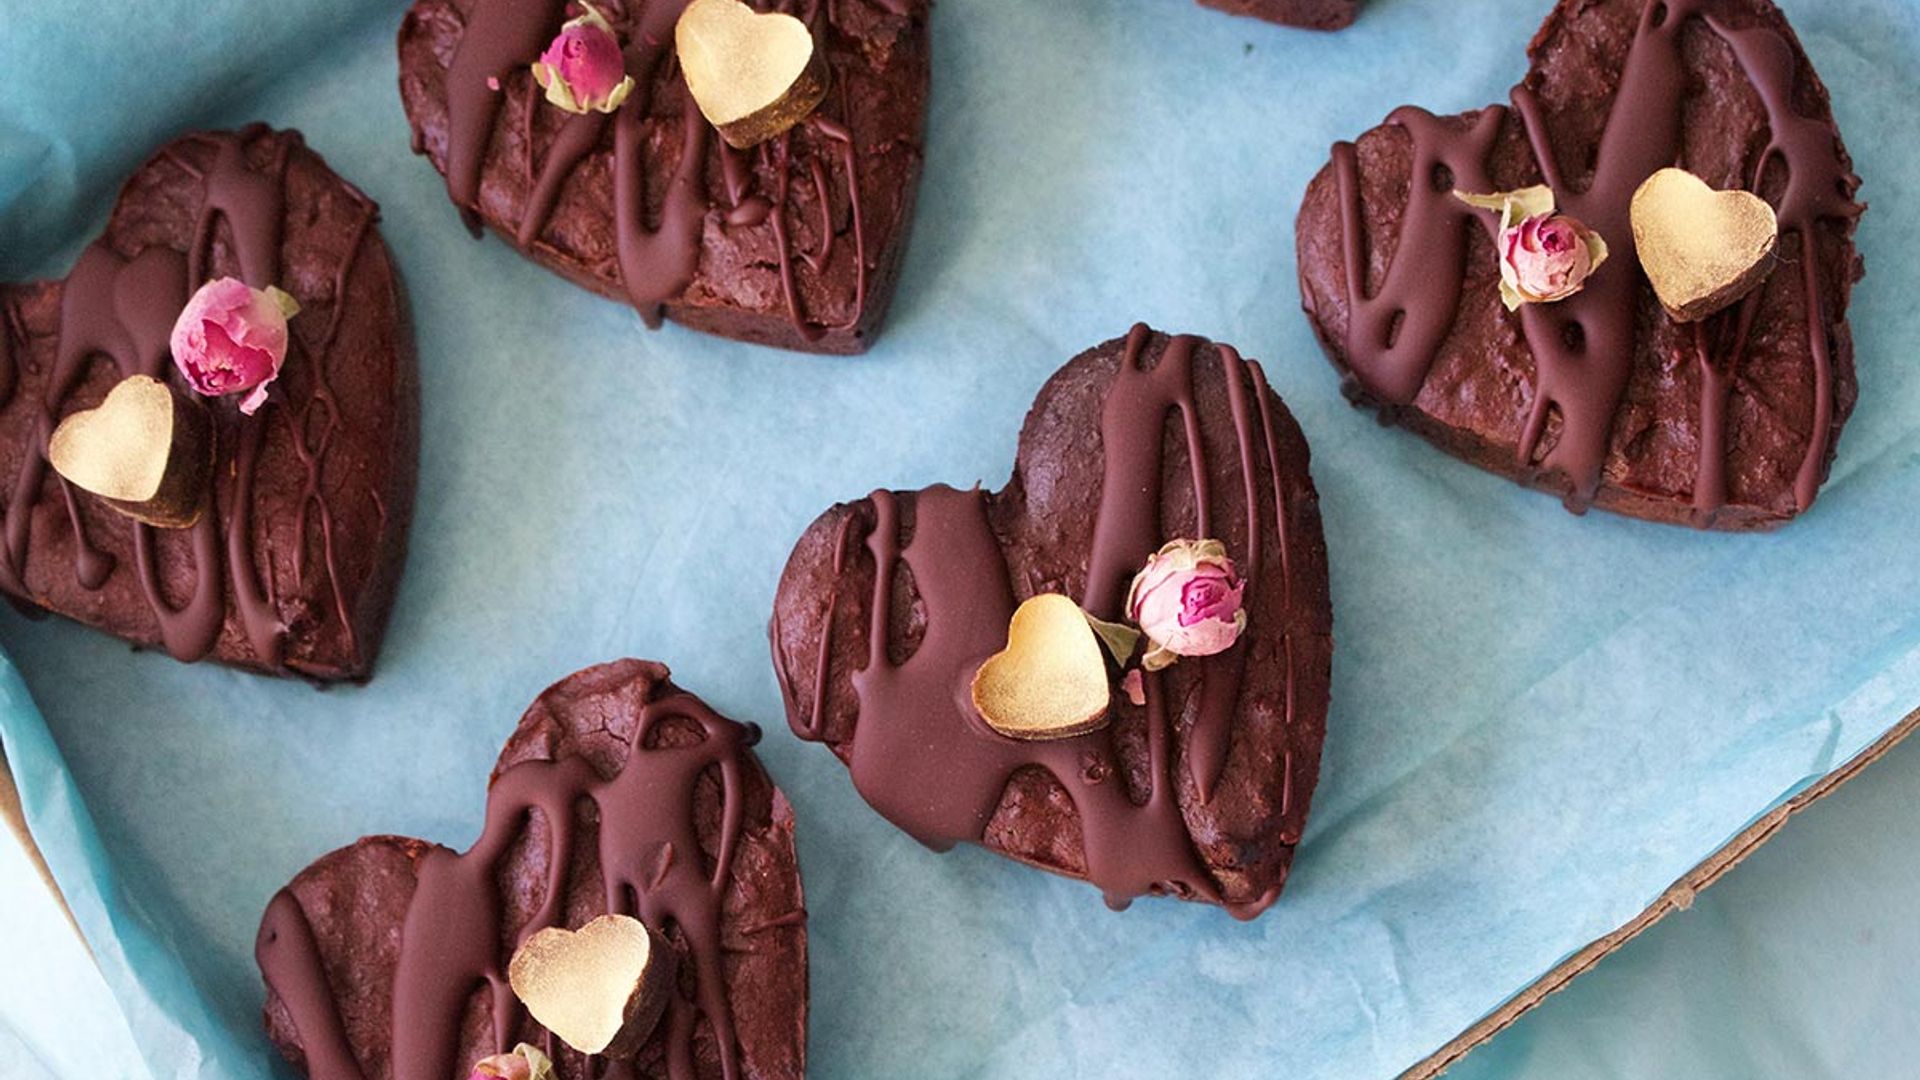 These vegan chocolate heart-shaped brownies are the perfect gift to bake for a loved one